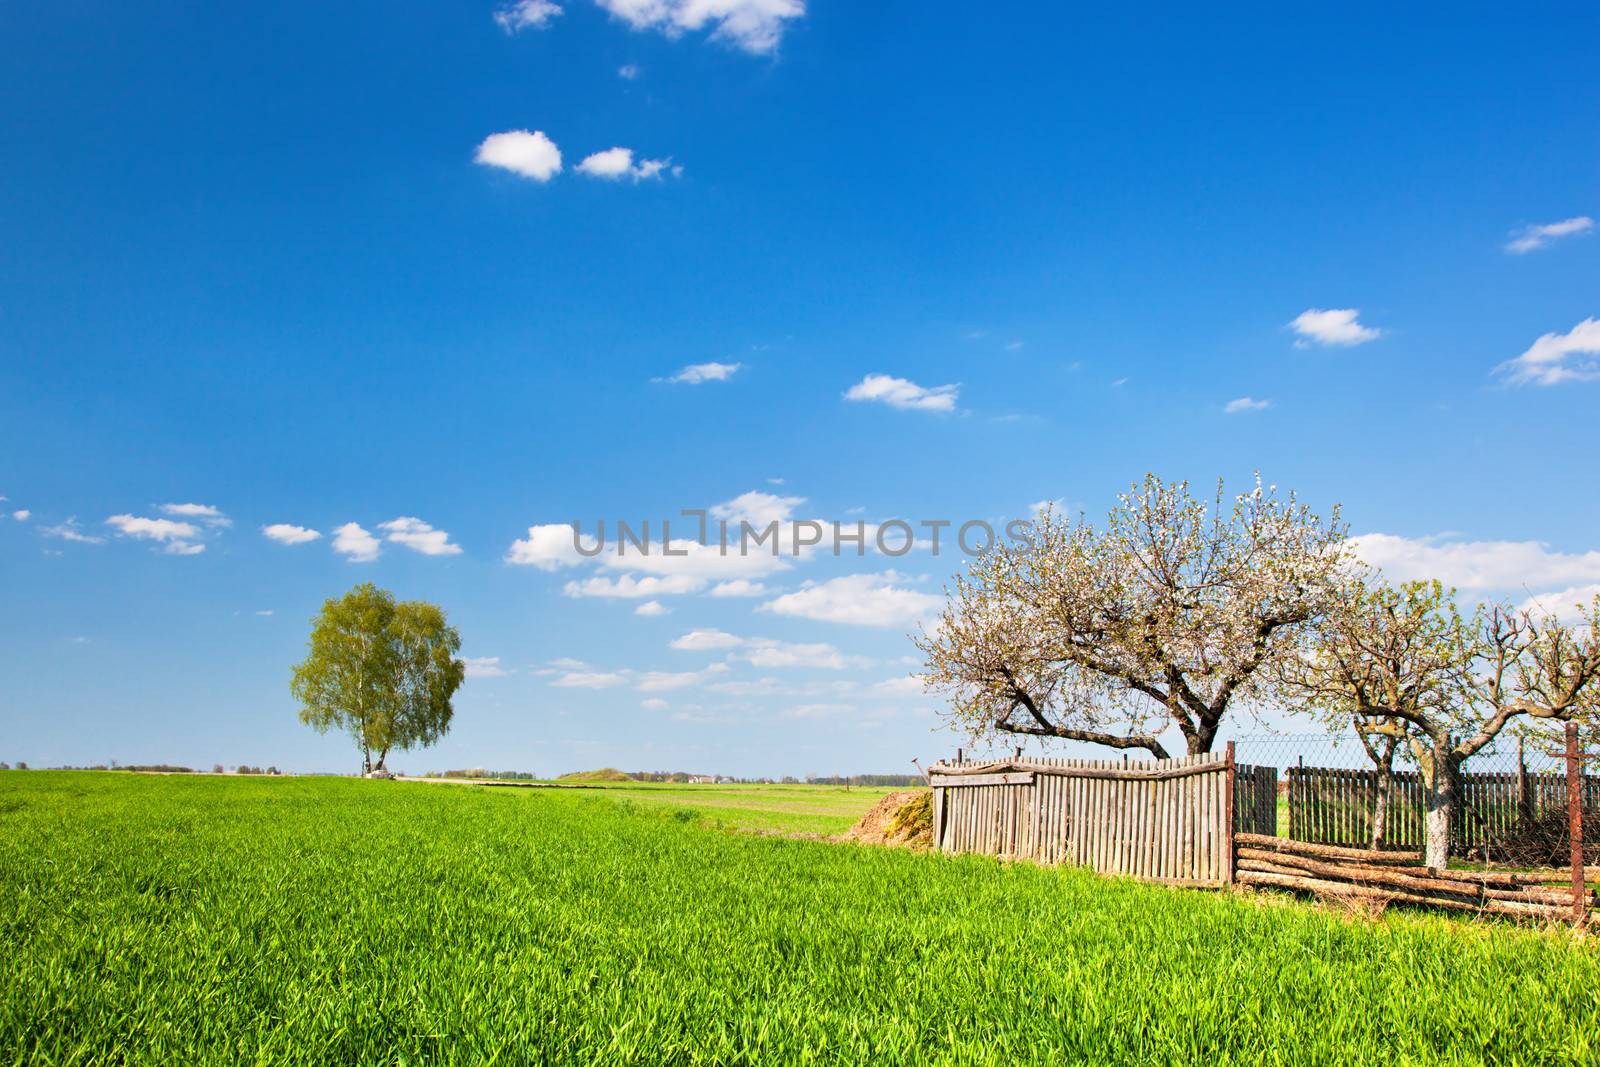 Countryside landscape during spring. Grassy field with trees and wooden fence